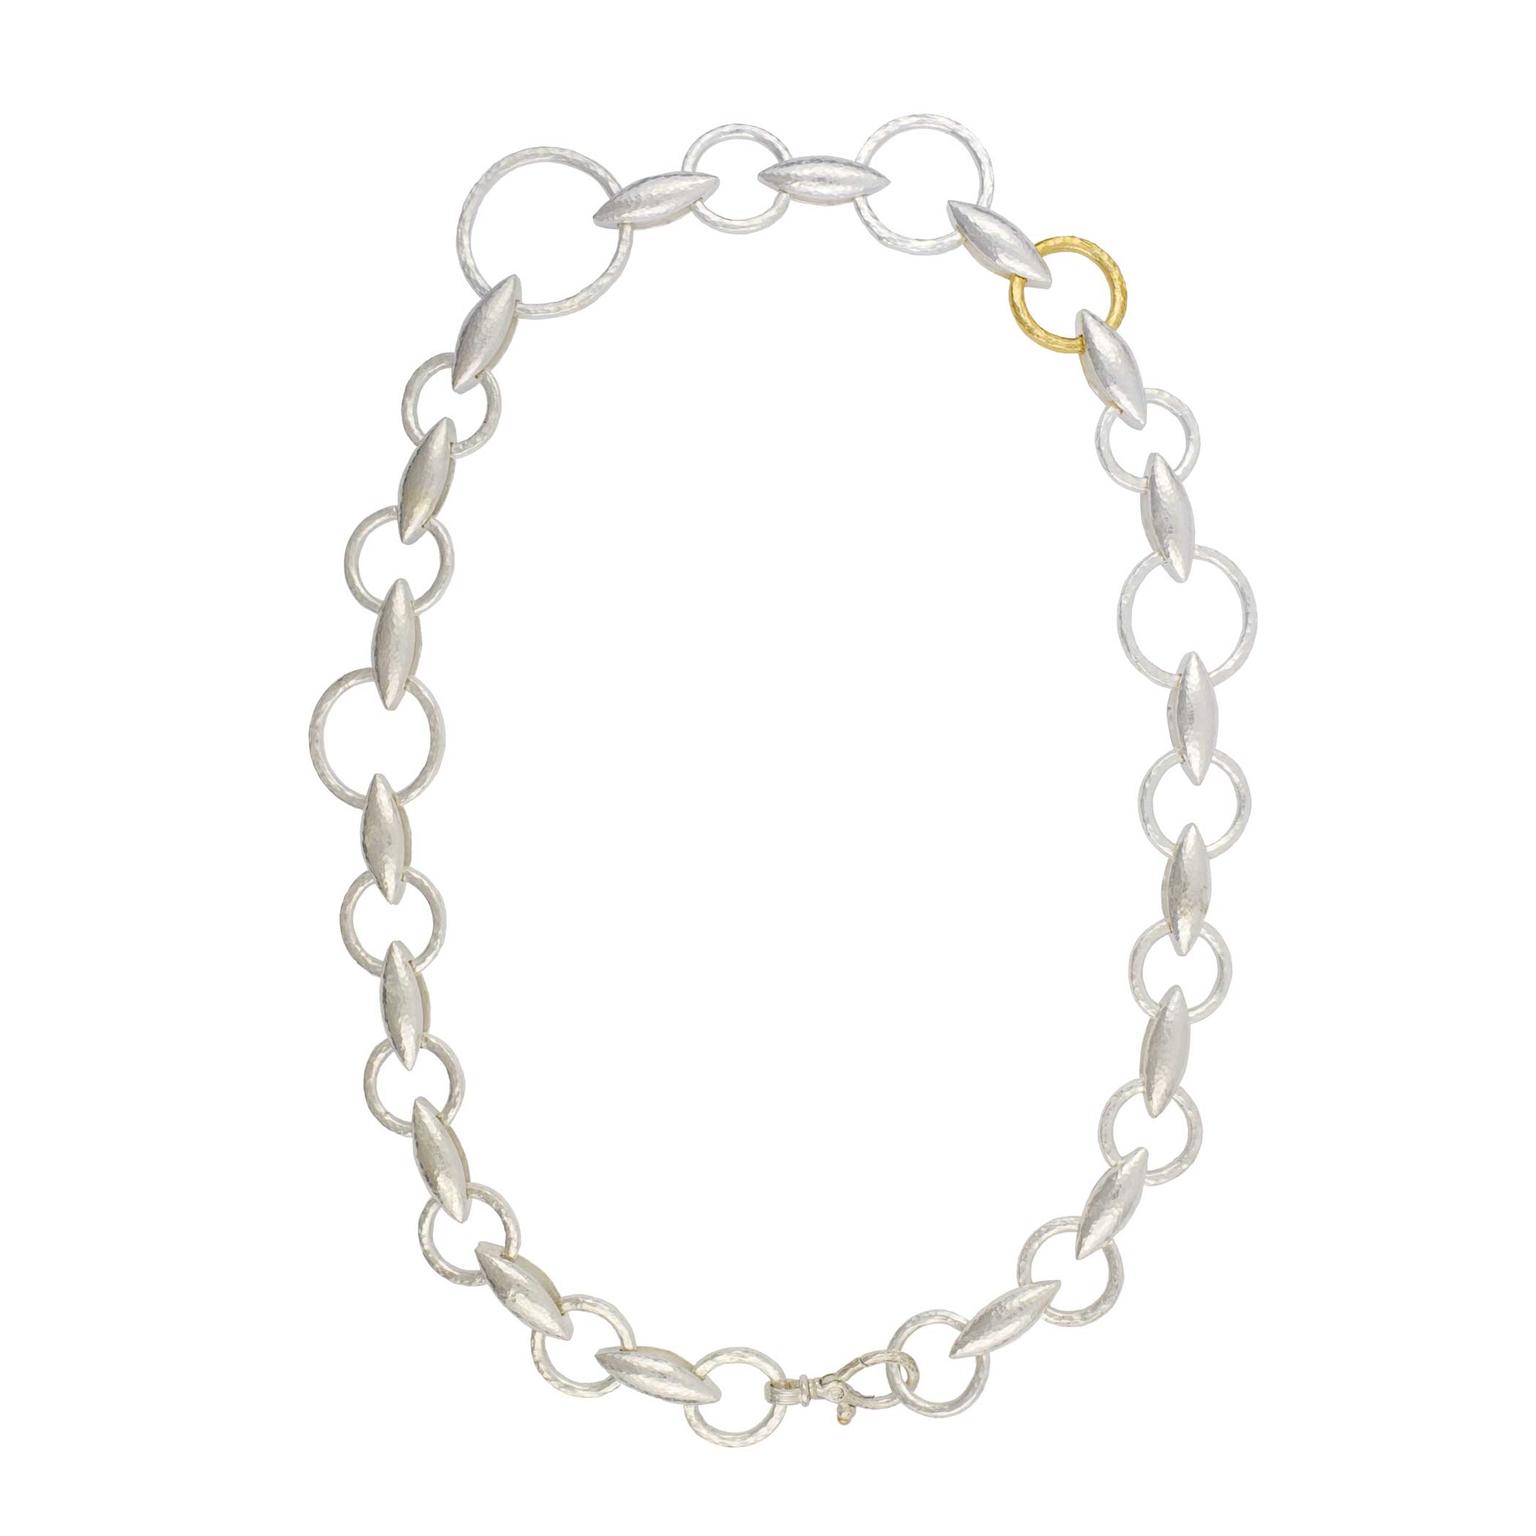 Gurhan Wheatla All Around Necklace in Sterling Silver Layered with 24ct Gold